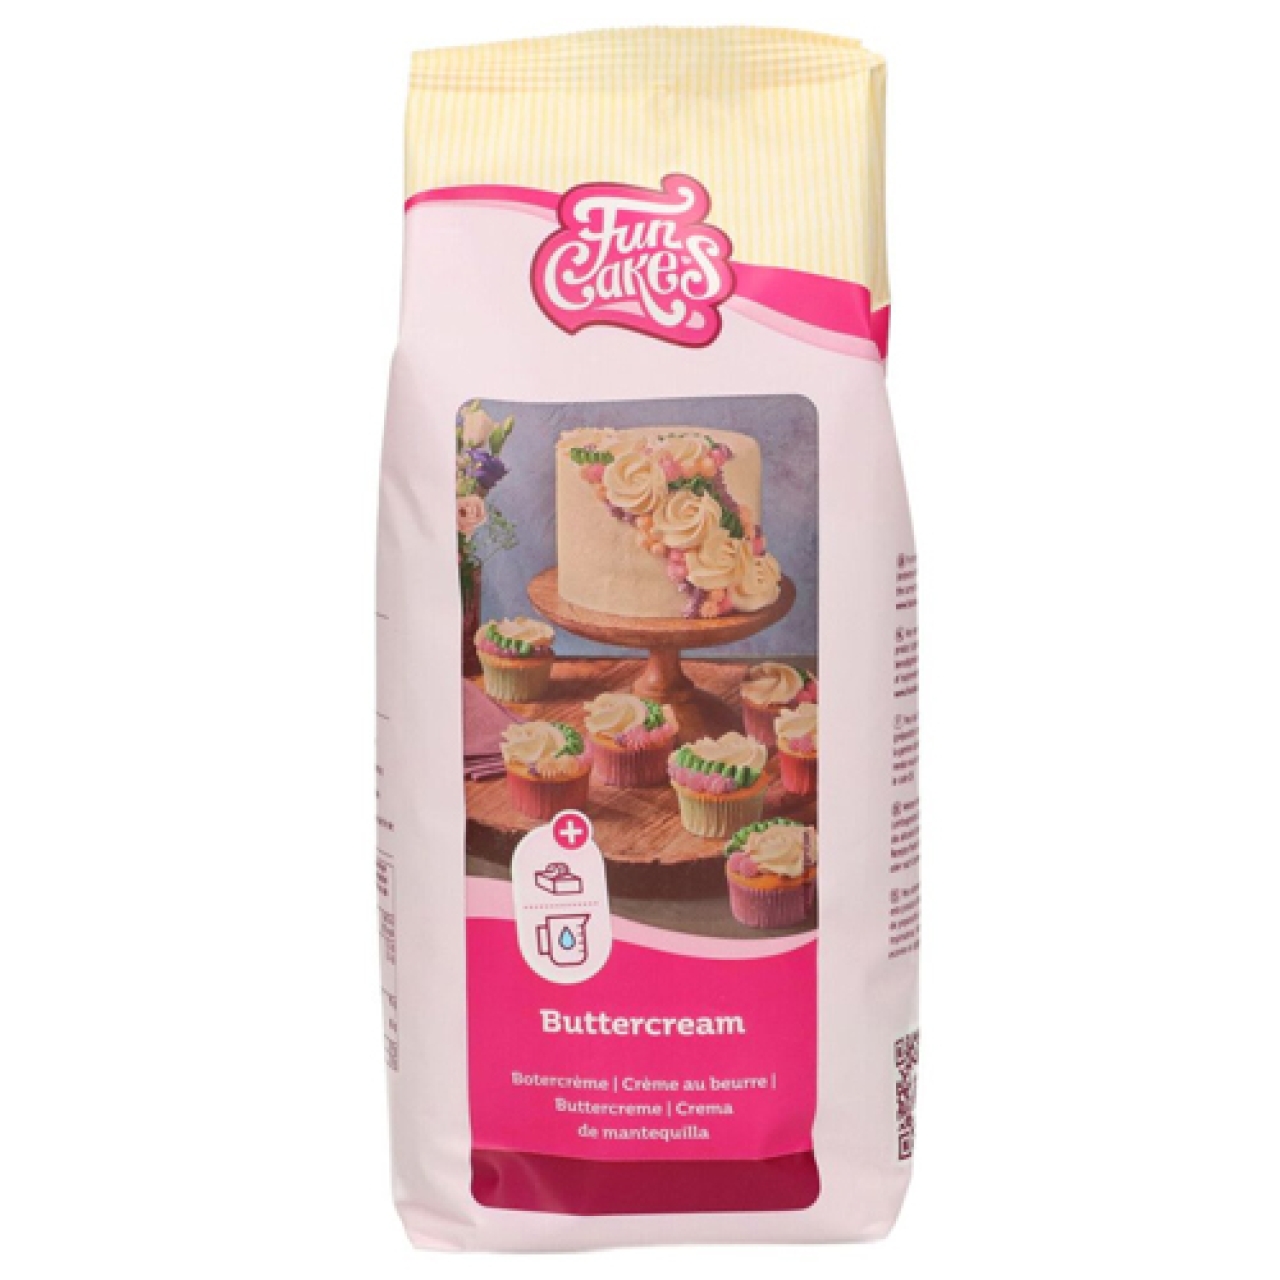 Buttercreme Mischung "Cupcakes Frosting", 1 kg, FunCakes